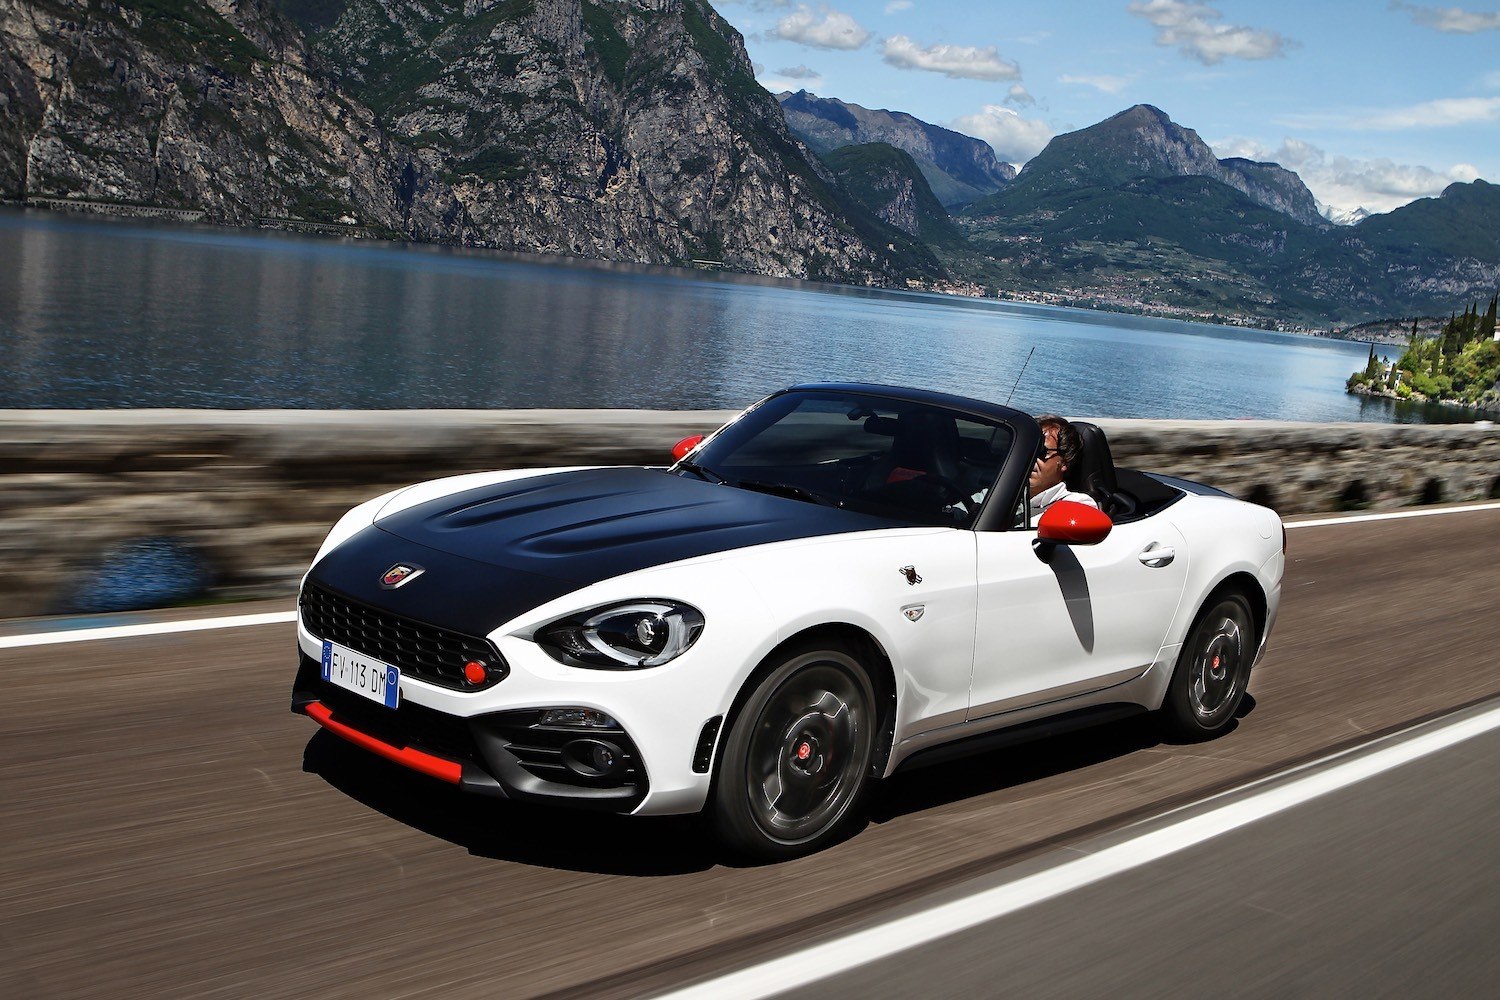 Jonathan Humphrey reviews the Abarth 124 Spider for Drive 7